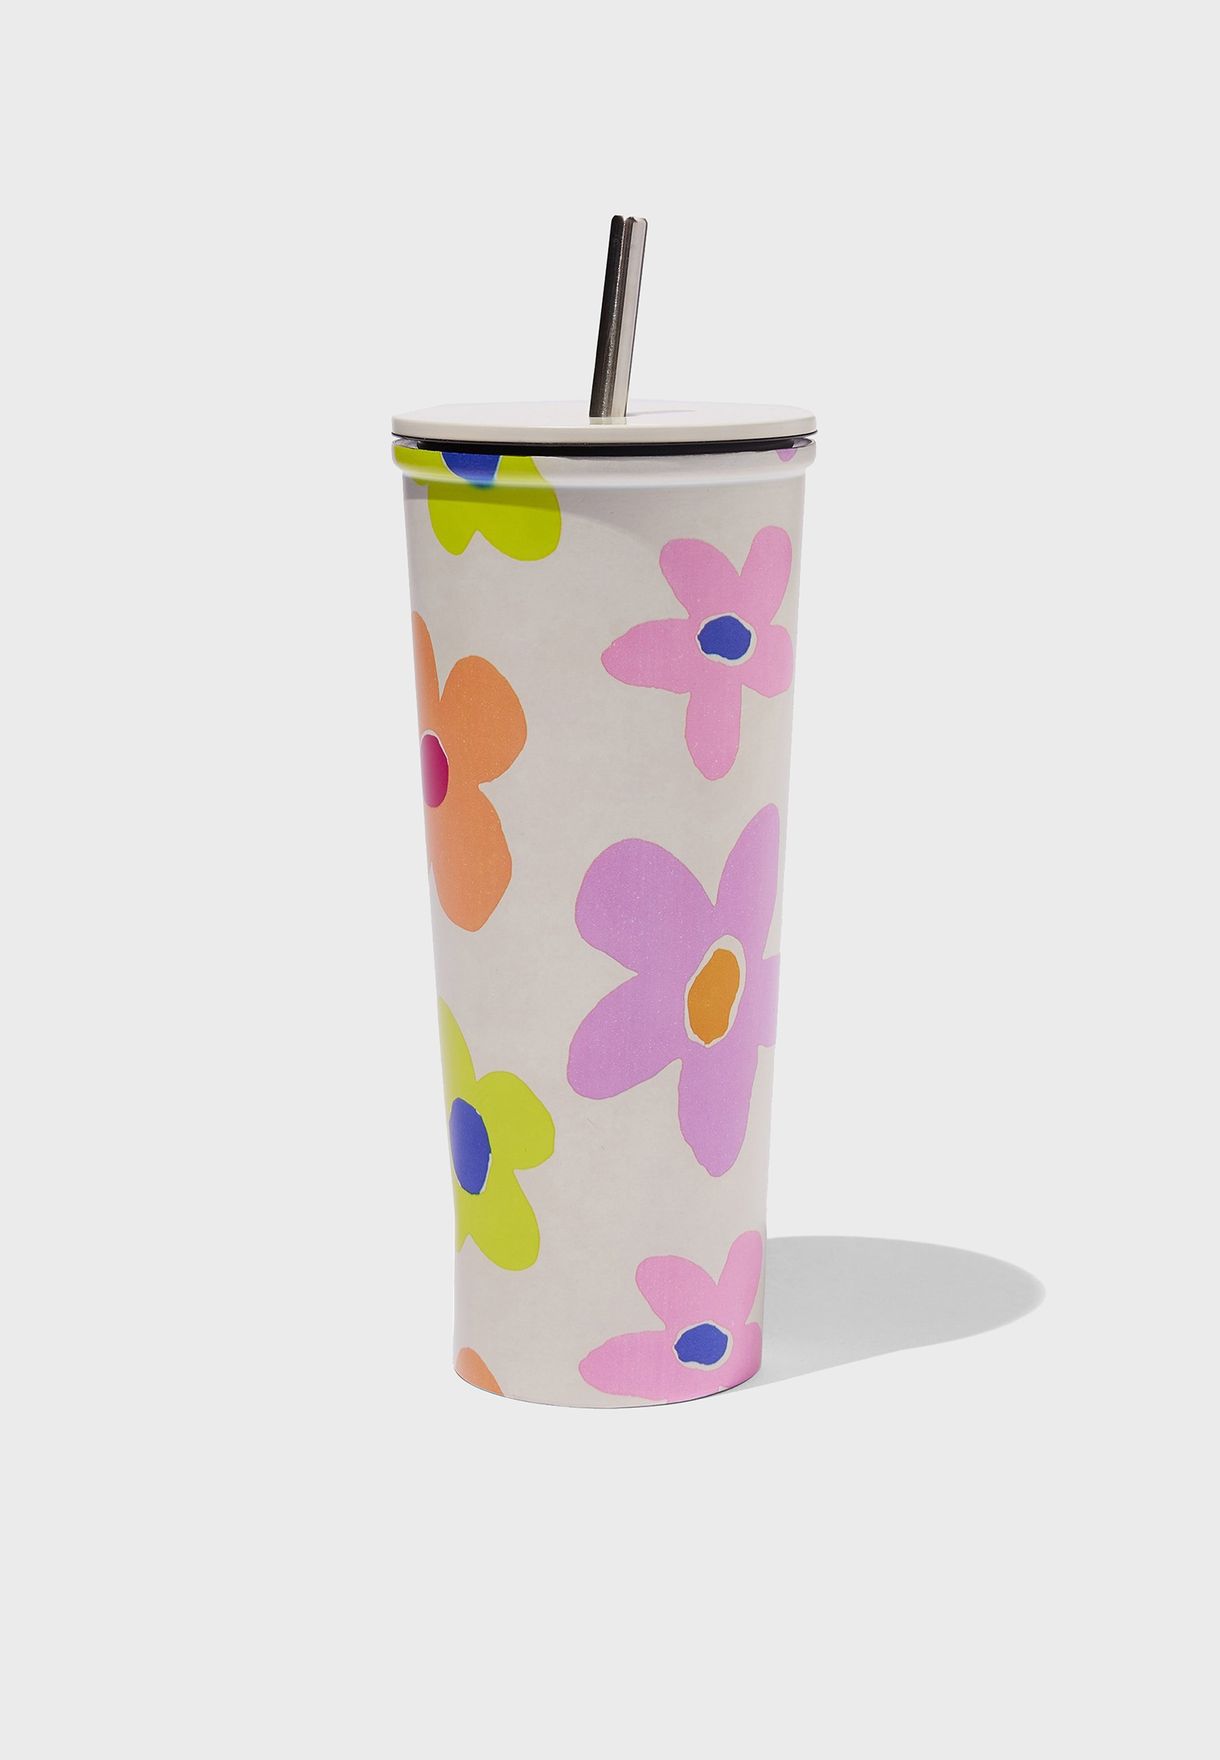 Drawn Daisy Metal Smoothie Cup